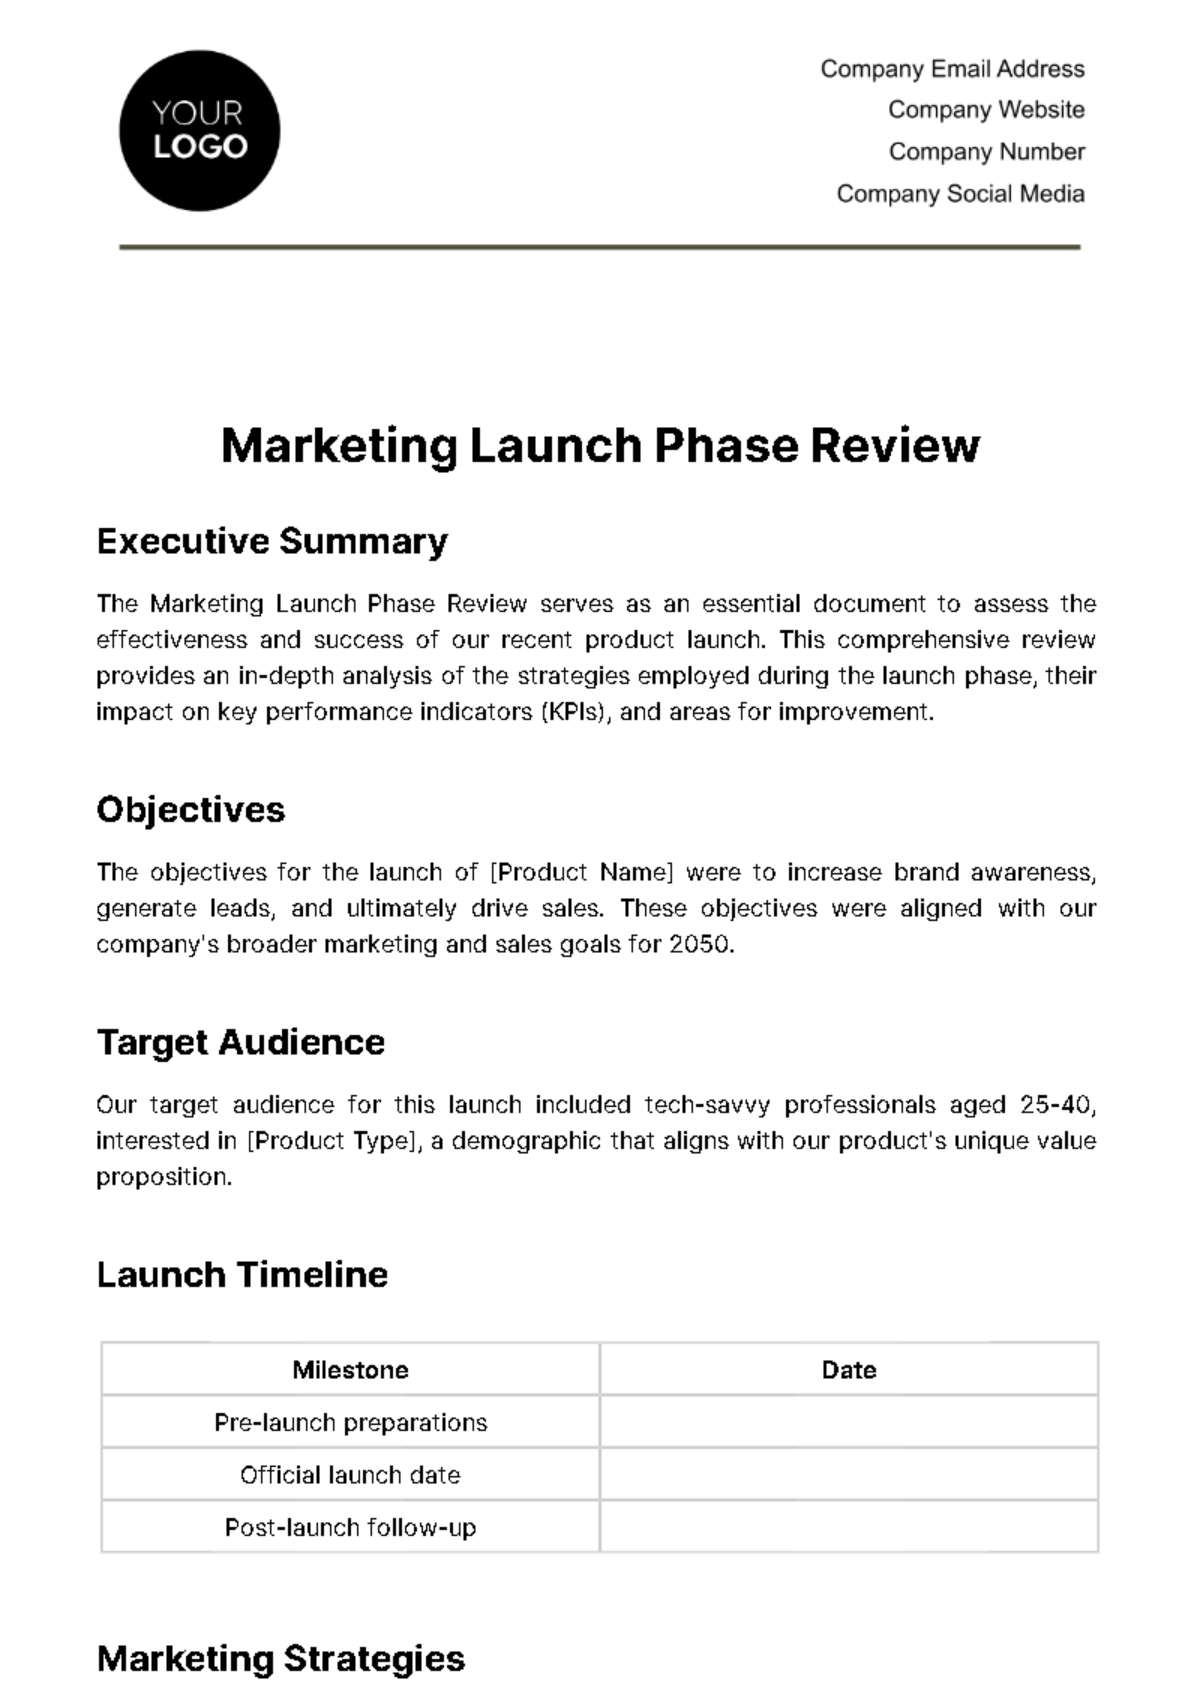 Free Marketing Launch Phase Review Template